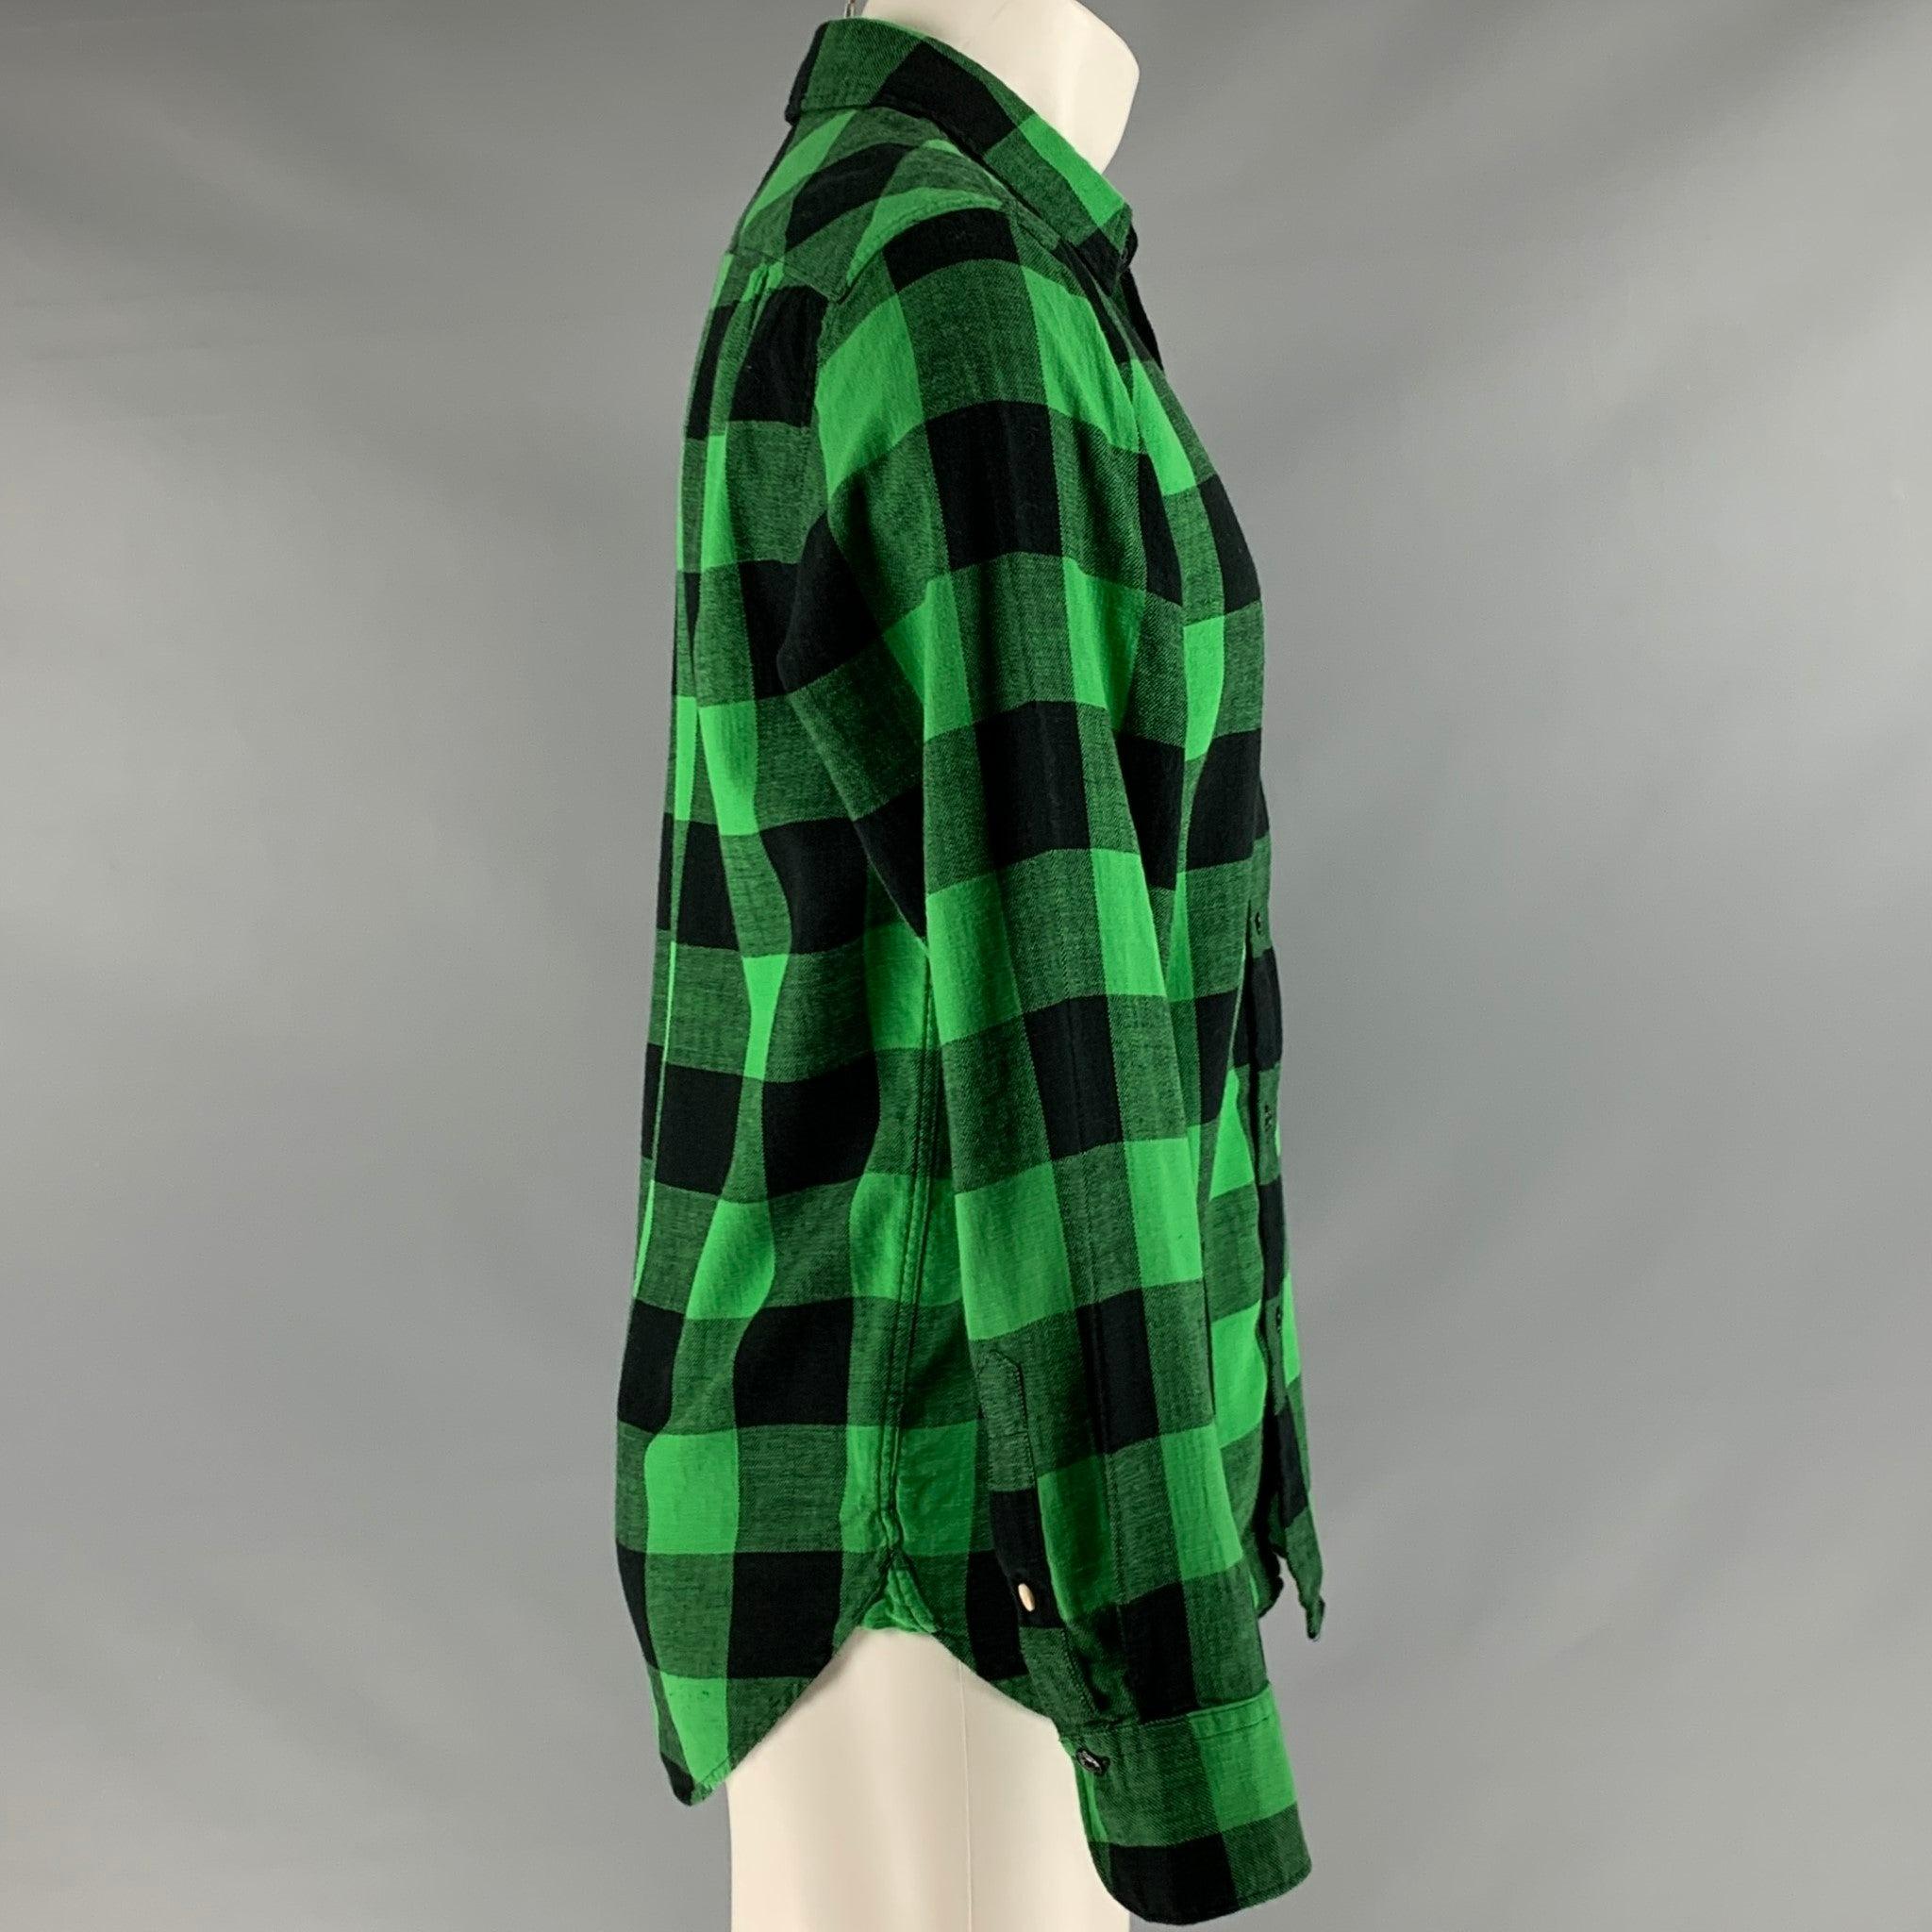 RAG & BONE long sleeve shirt
in a green and black cotton flannel featuring a checkered pattern, one pocket, and a button closure.Excellent Pre-Owned Condition. 

Marked:   S 

Measurements: 
 
Shoulder: 16 inches Chest: 41 inches Sleeve: 24.5.